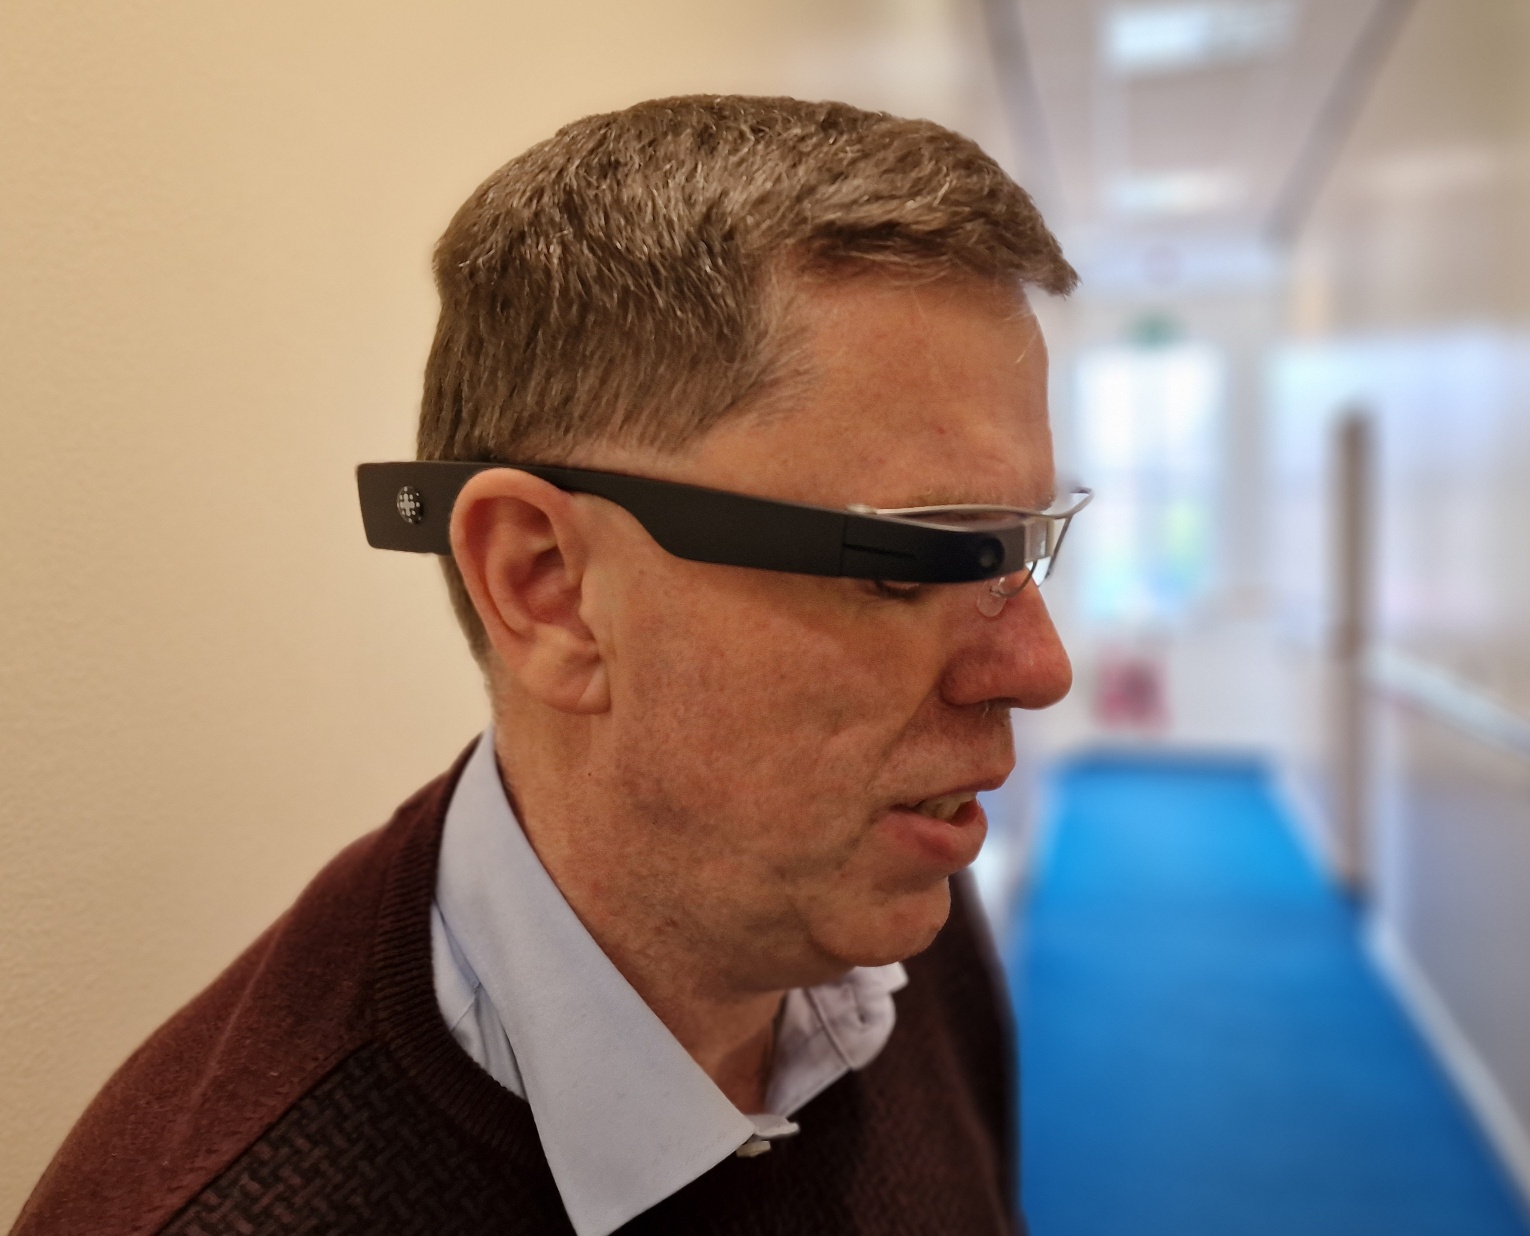 Picture shows our CEO Mark demonstrating the glasses.